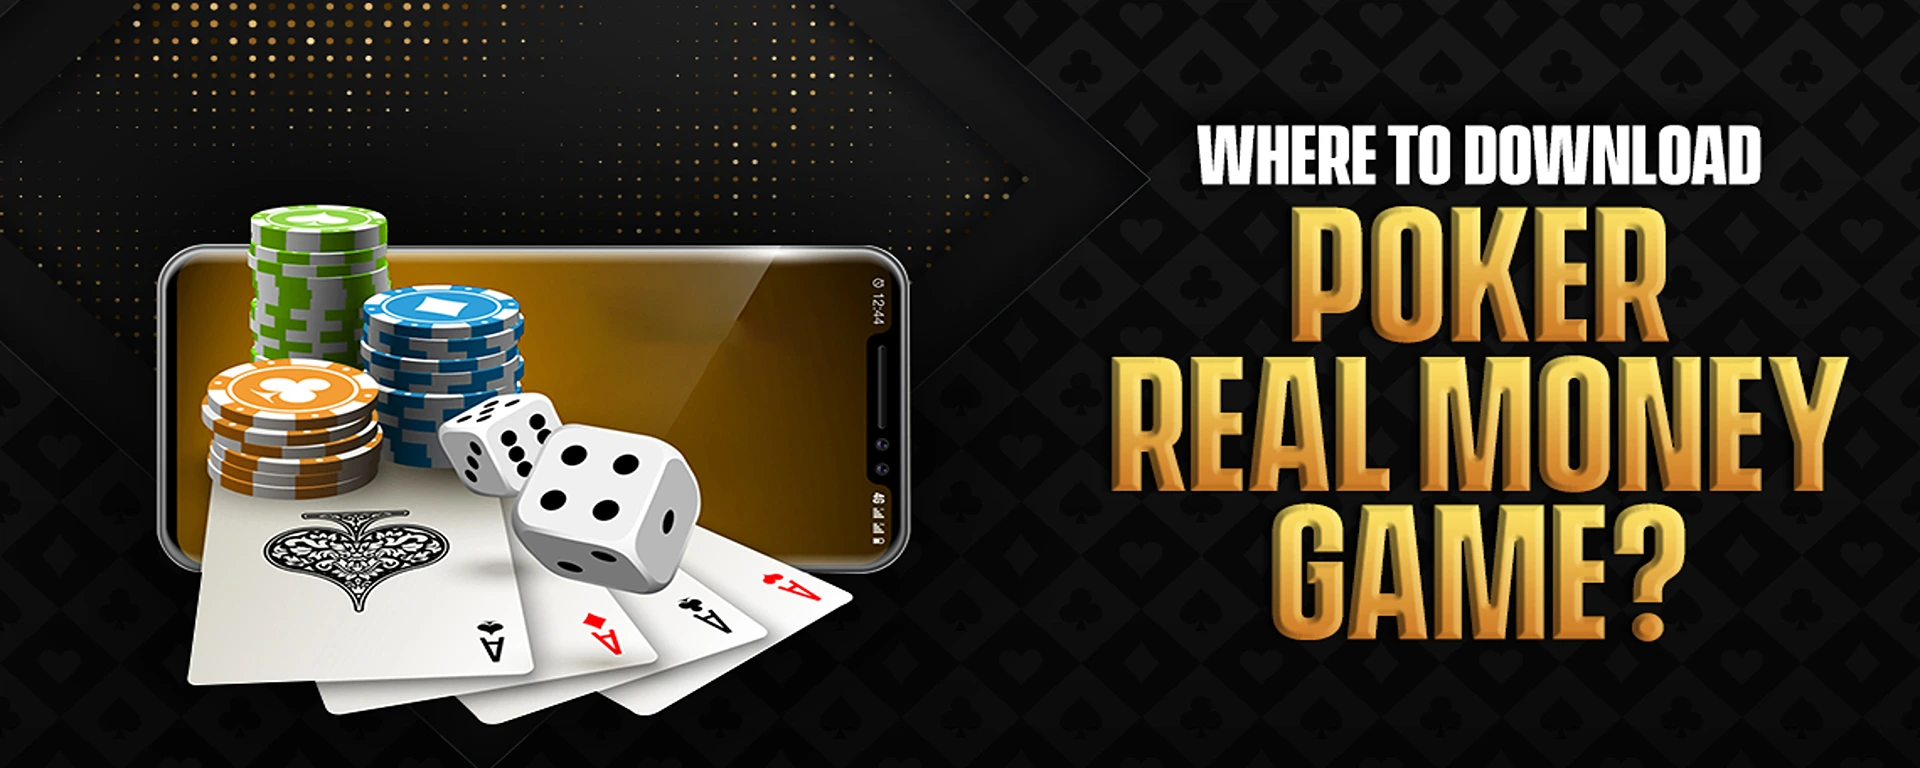 Where To Download Poker Real Money Game